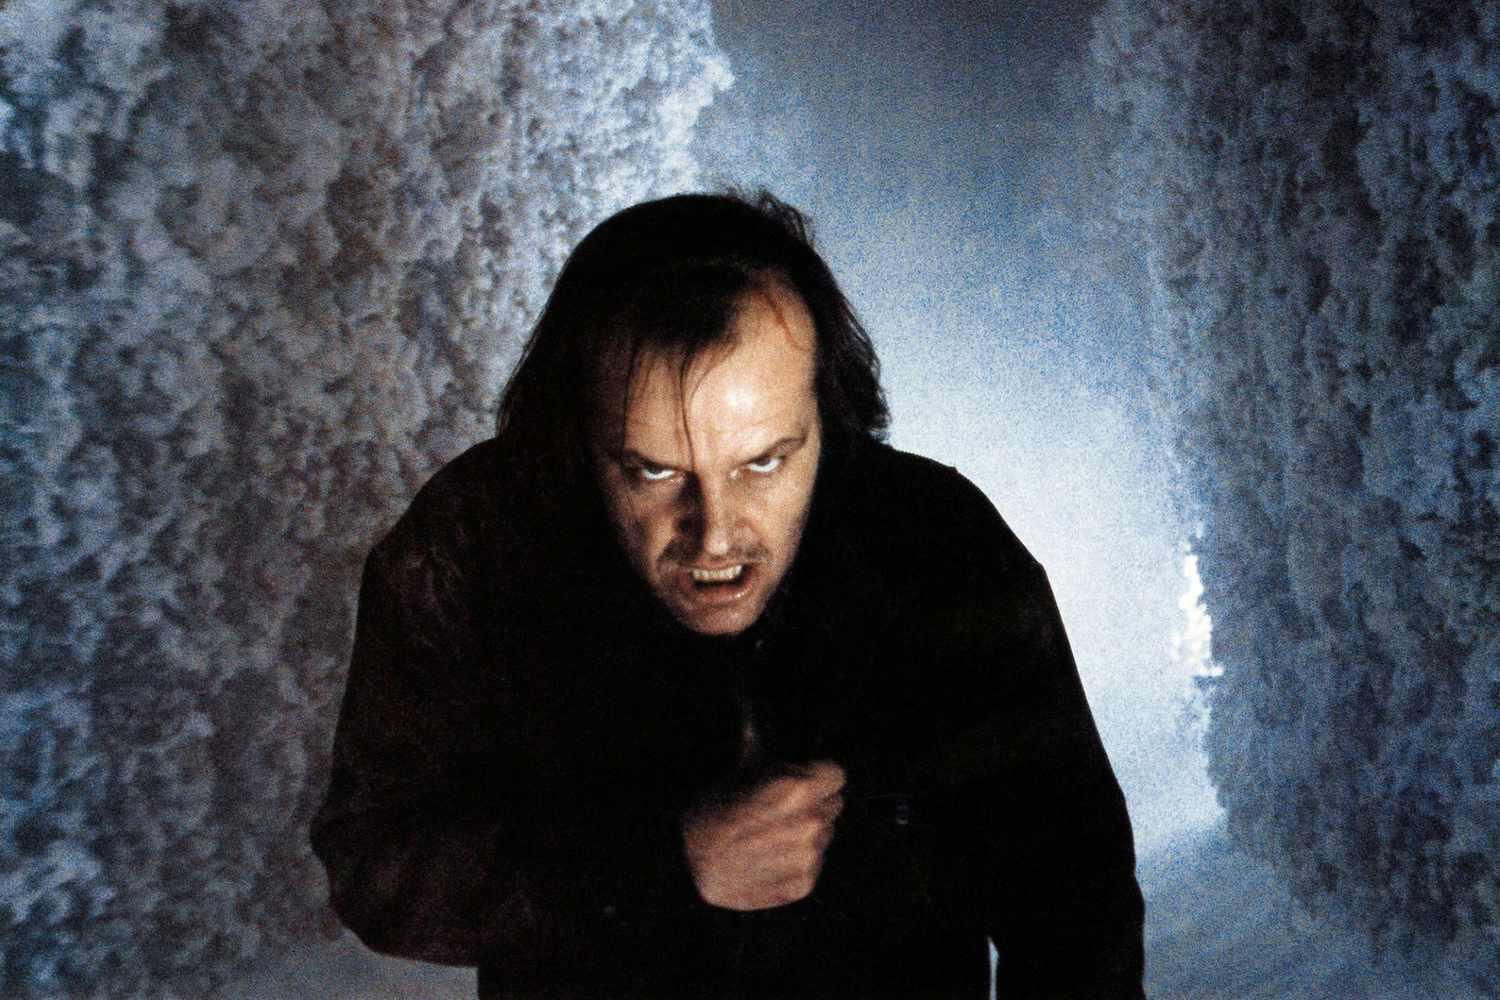 The Shining producer: Why the ending really changed